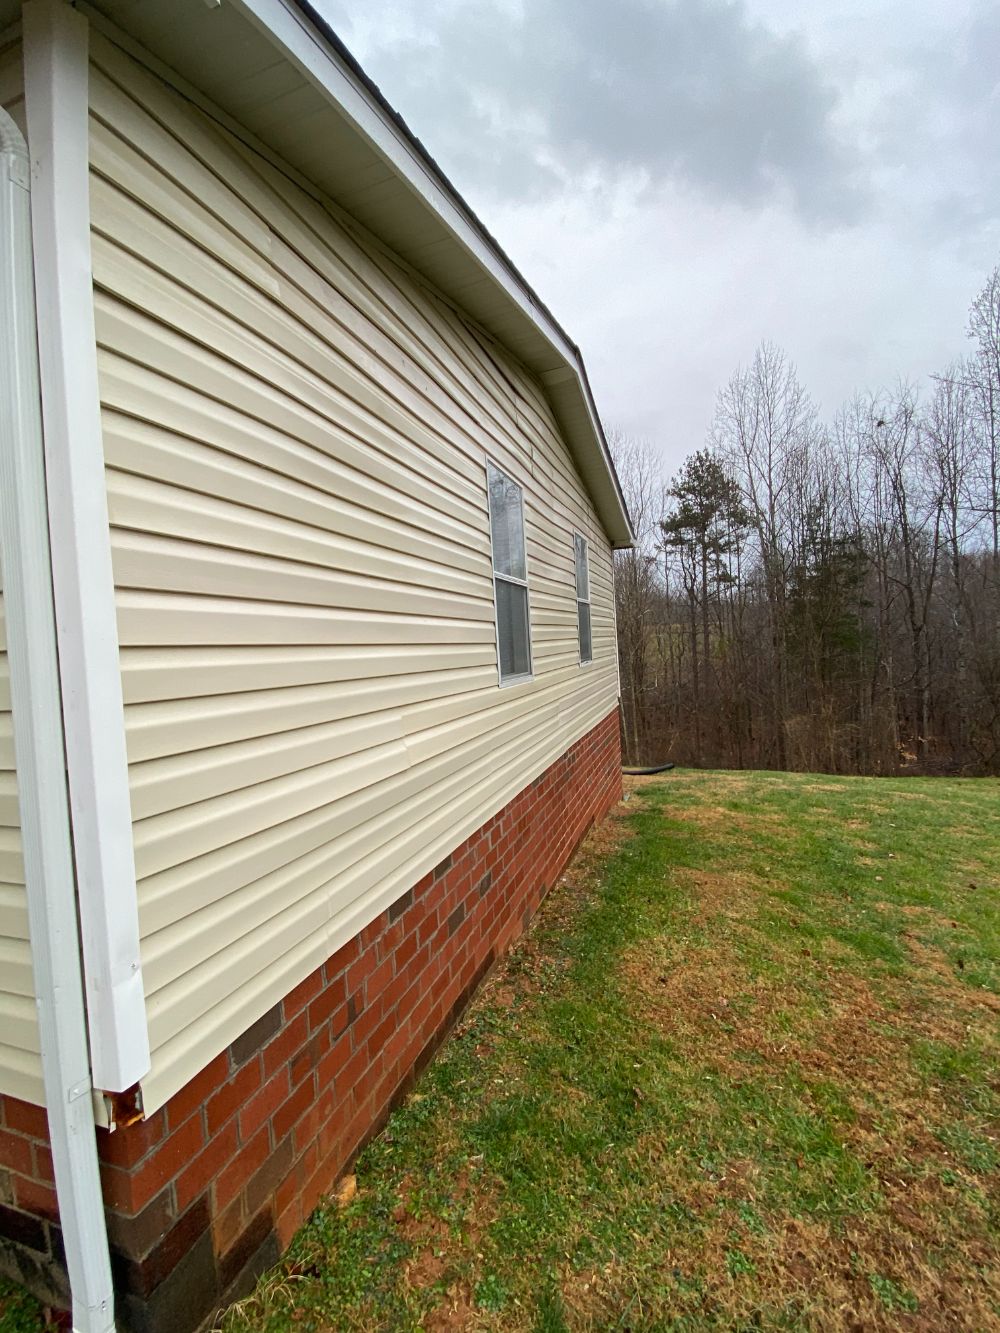 Siding and Deck Cleaning in Thaxton, VA